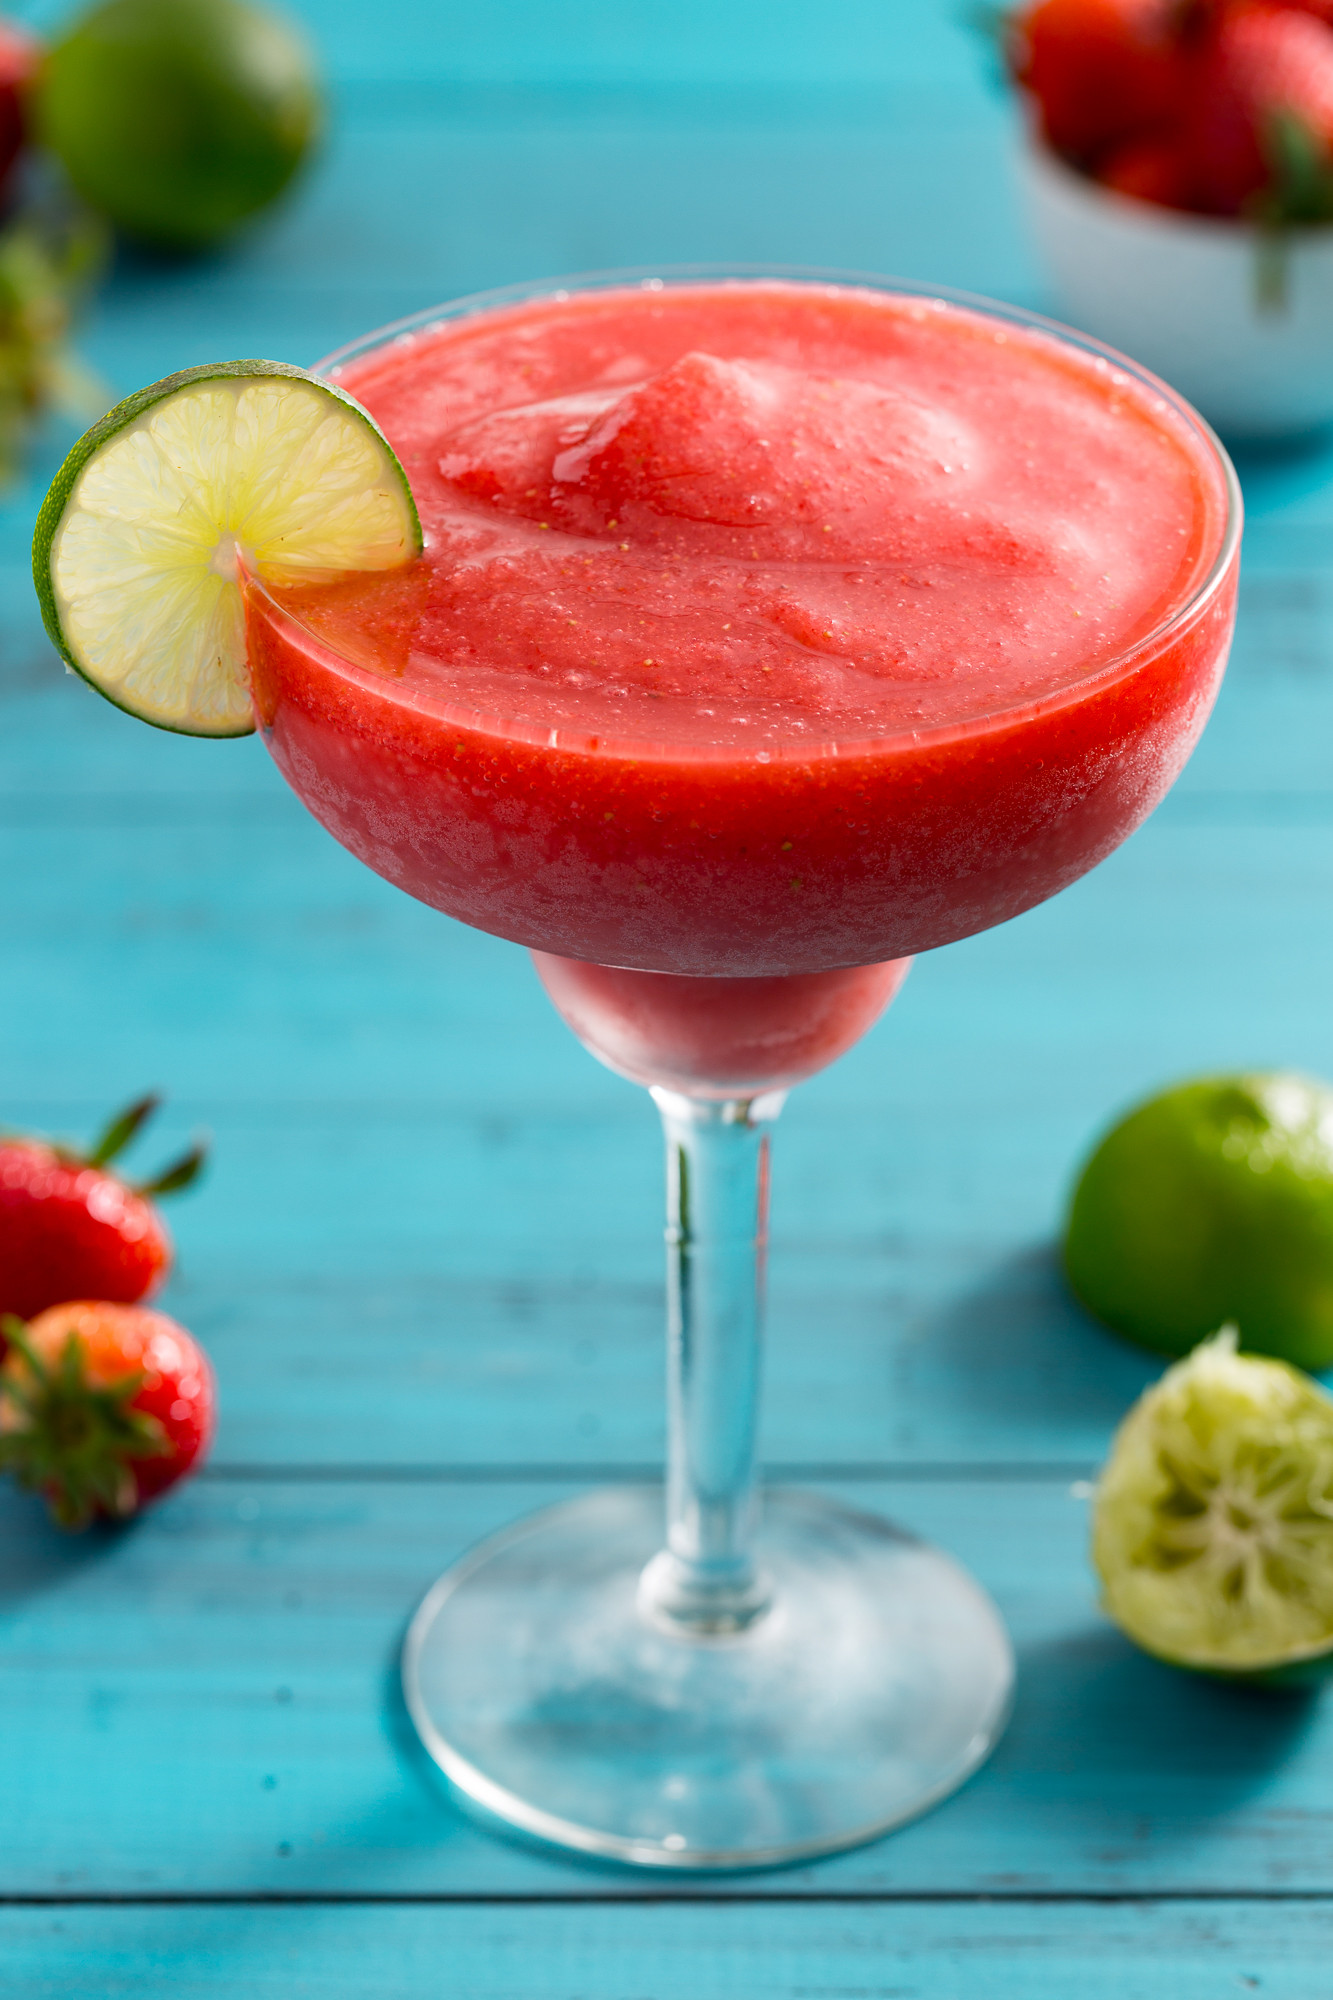 Blended Cocktails Recipes
 Easy Frozen Strawberry Daiquiri Recipe How to Make a